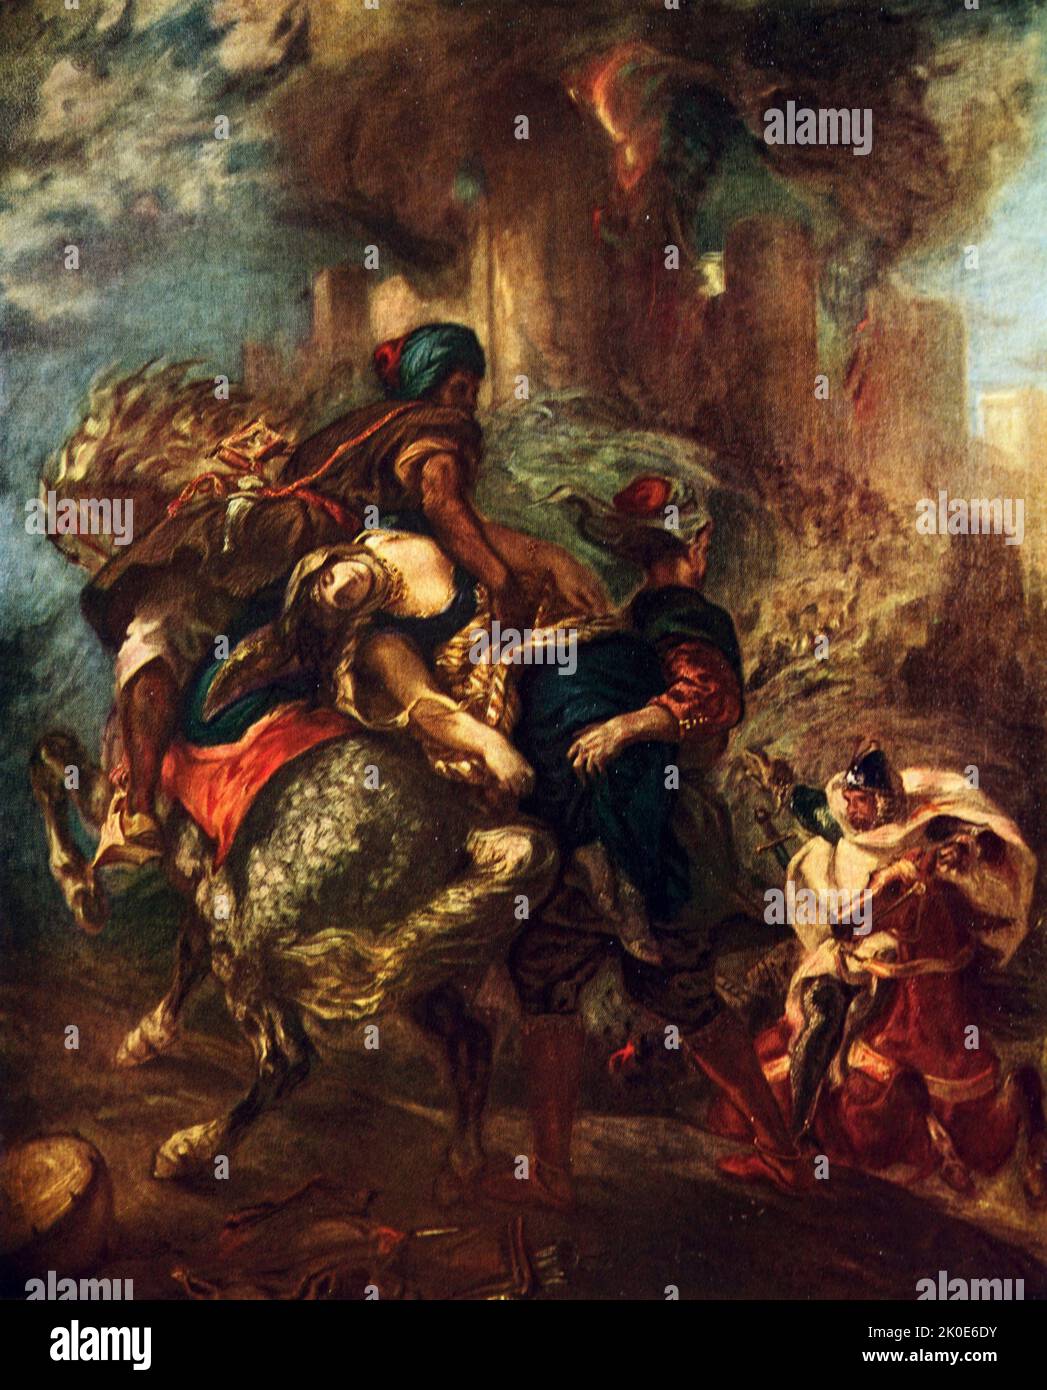 The Abduction of Rebecca is a mid-19th century painting by French artist Eugene Delacroix. Done in oil on canvas, the work depicts the a scene from Sir Walter Scott's novel Ivanhoe in which the heroine Rebecca is abducted. Stock Photo